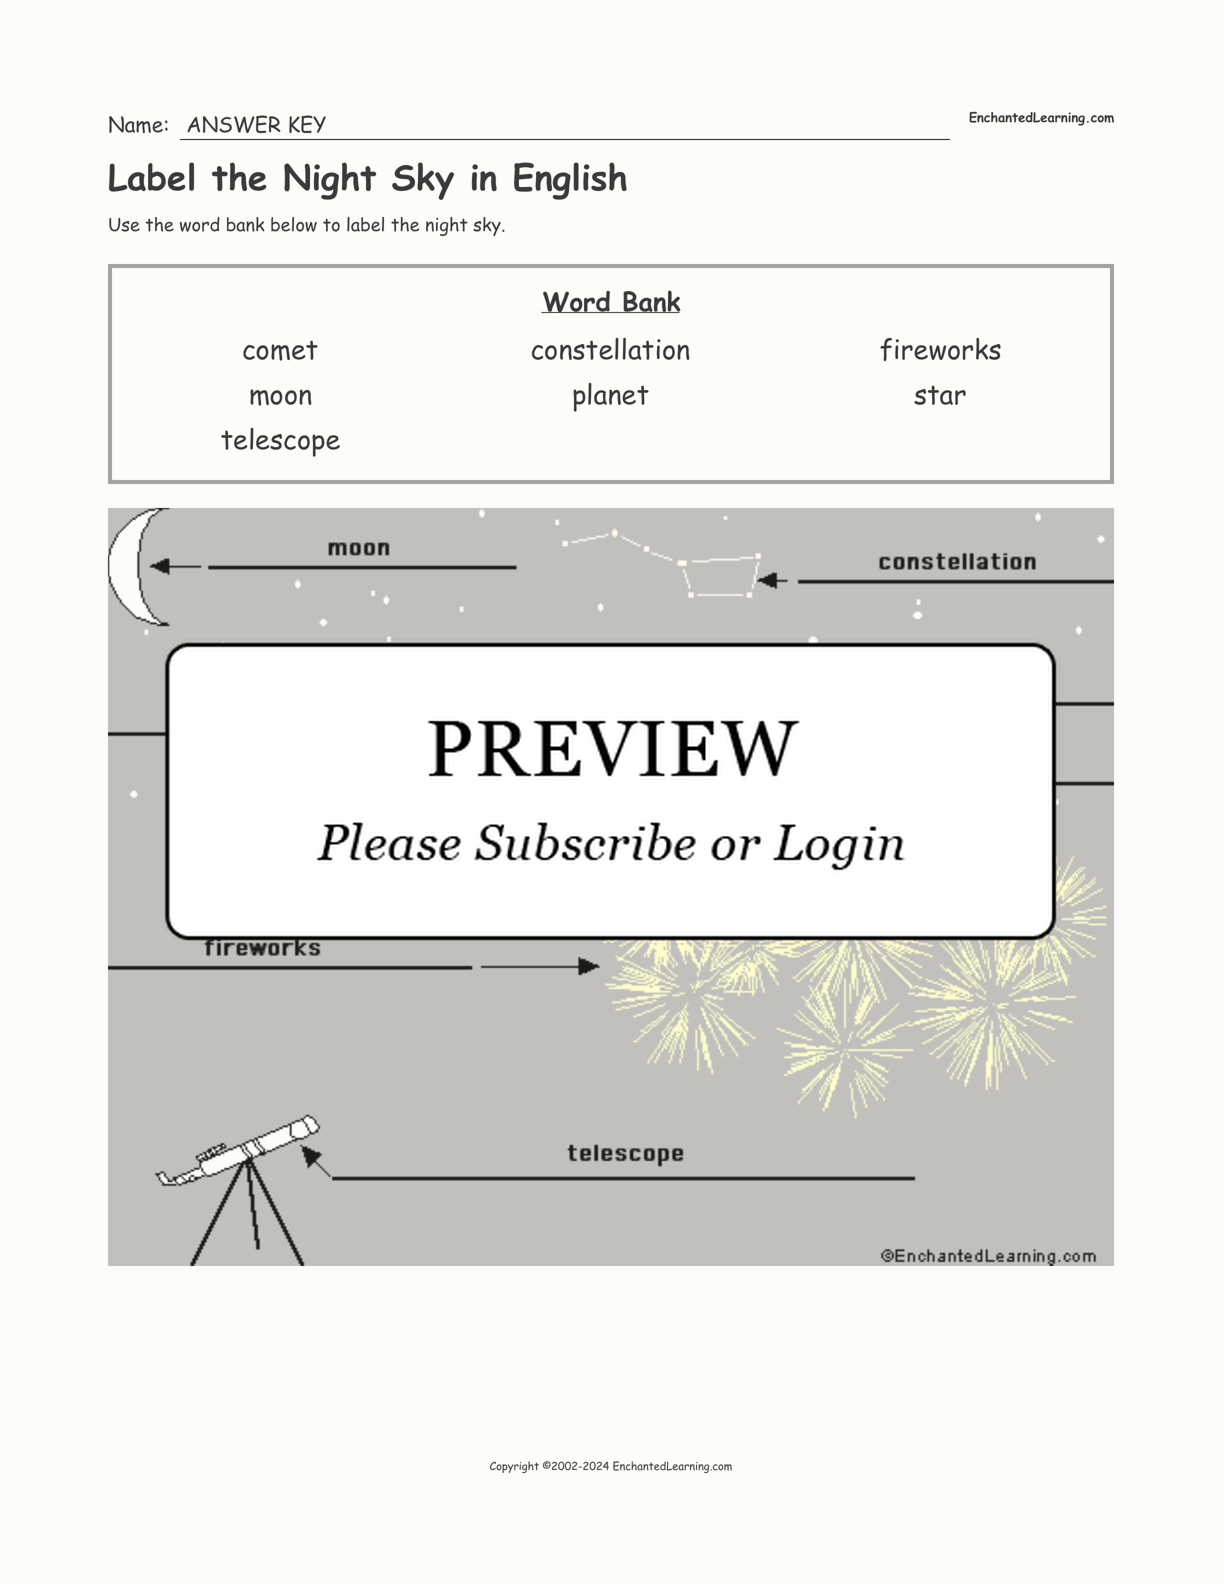 Label the Night Sky in English interactive worksheet page 2